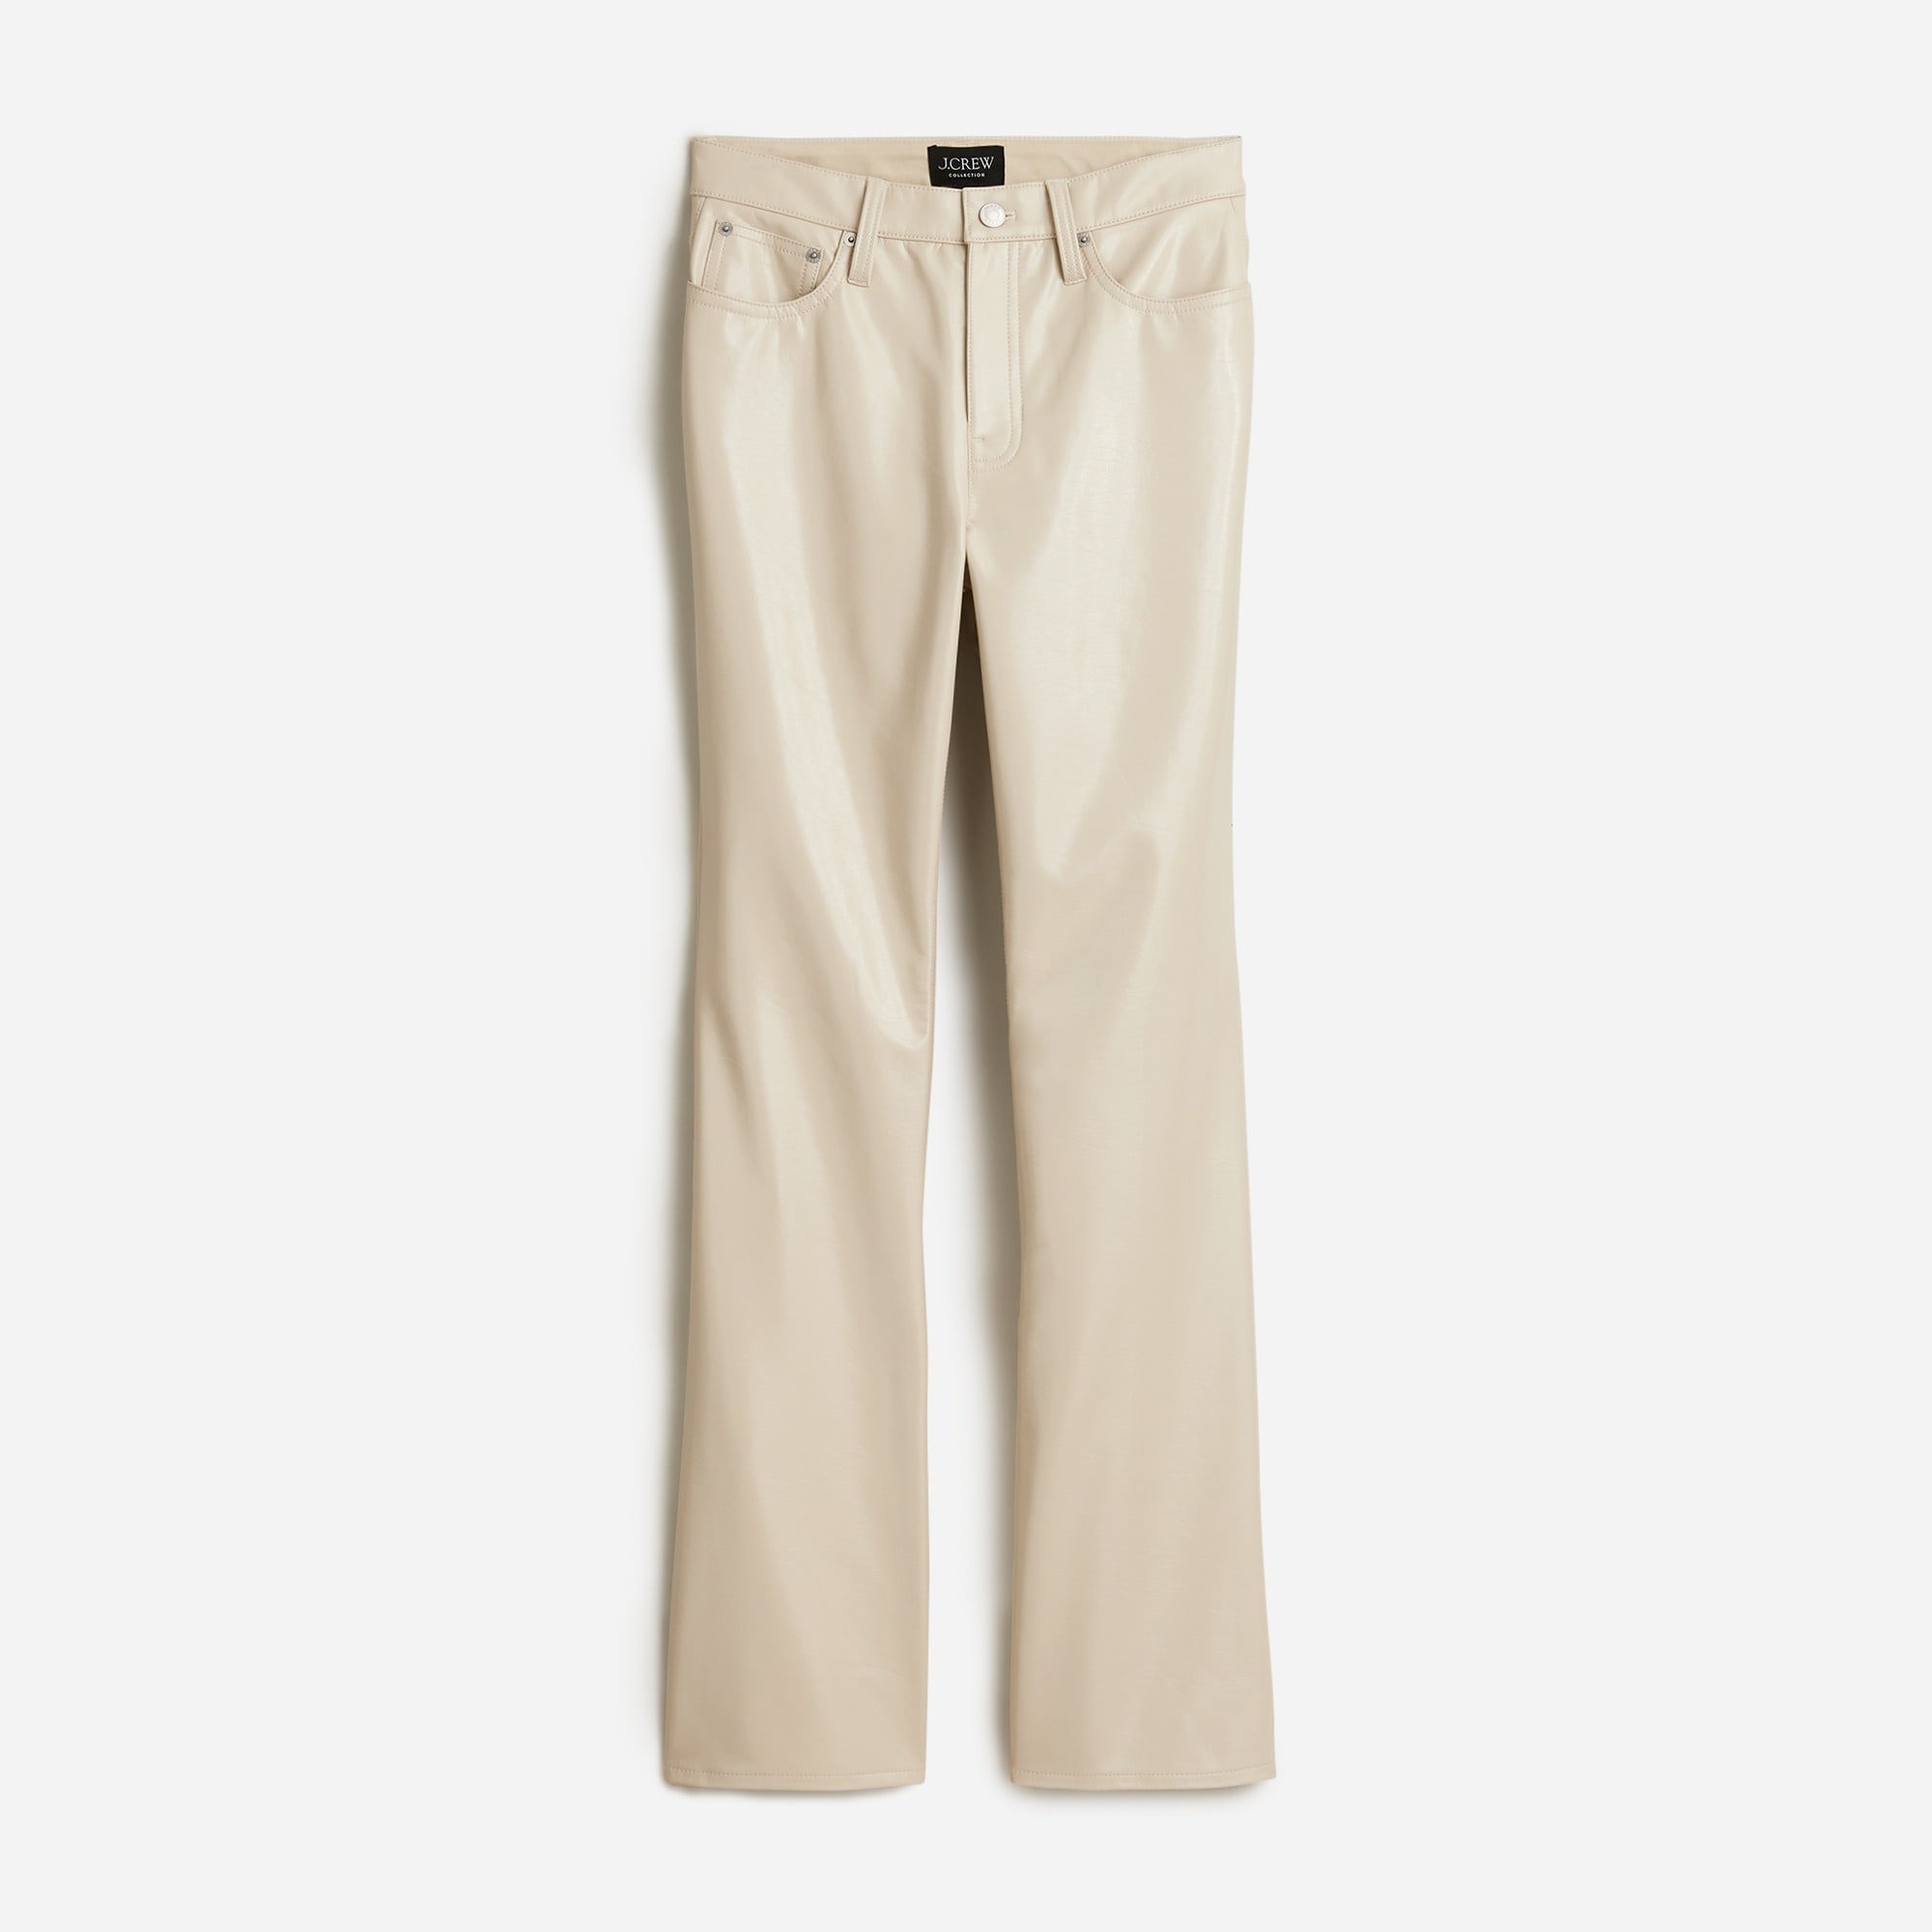 Jcrew Collection demi-boot pant in faux patent leather